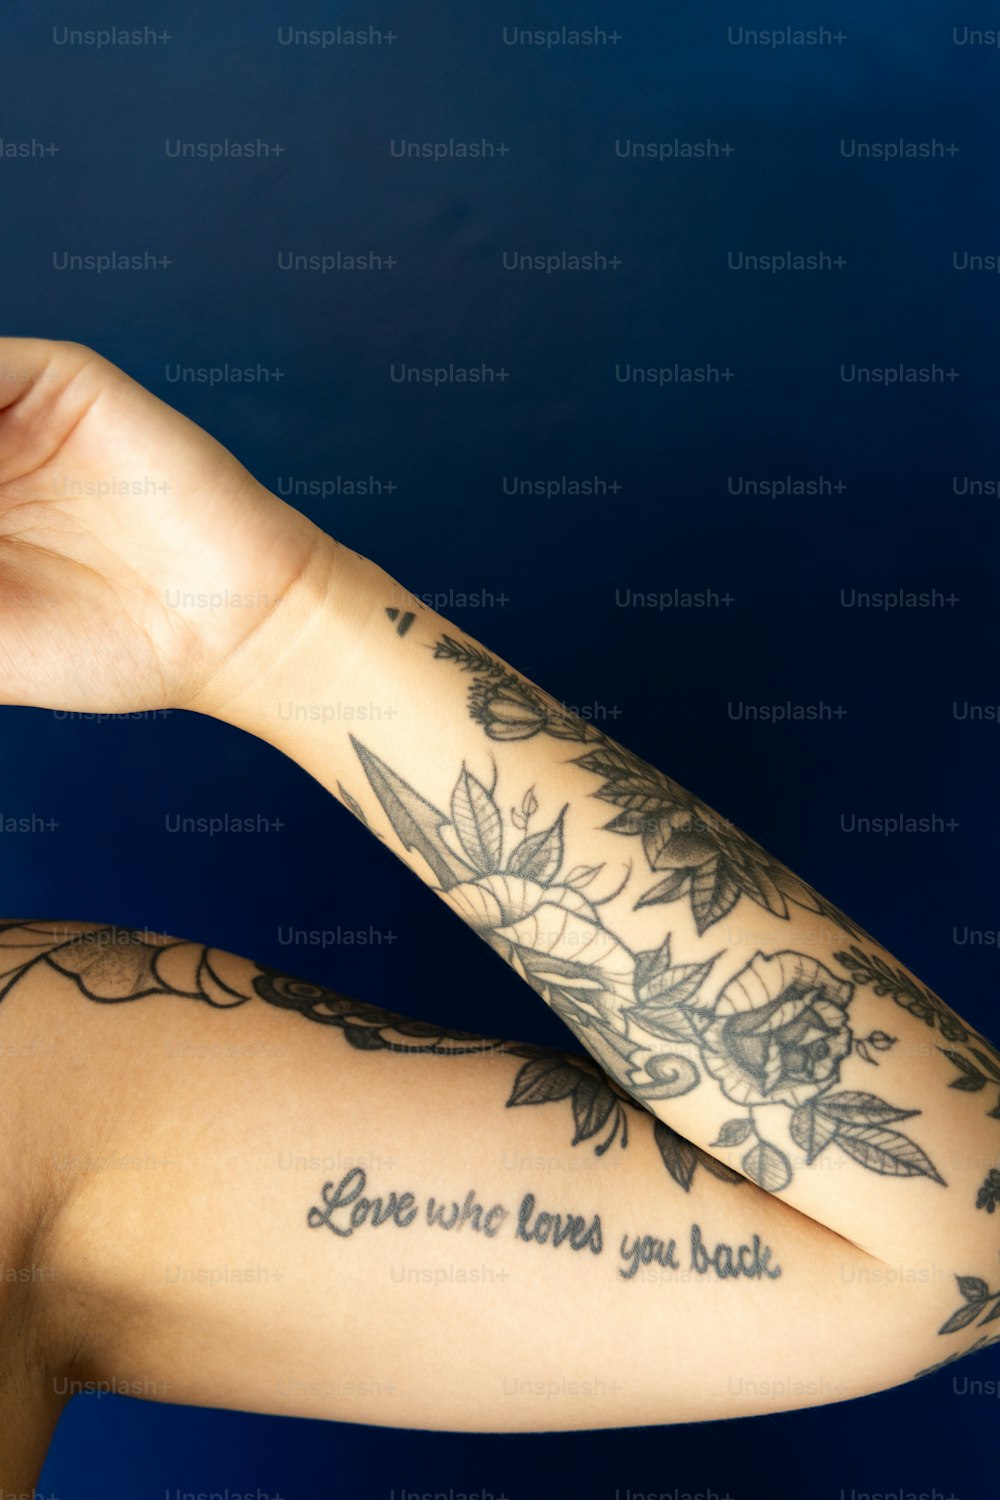 a woman with a tattoo on her arm holding a cell phone